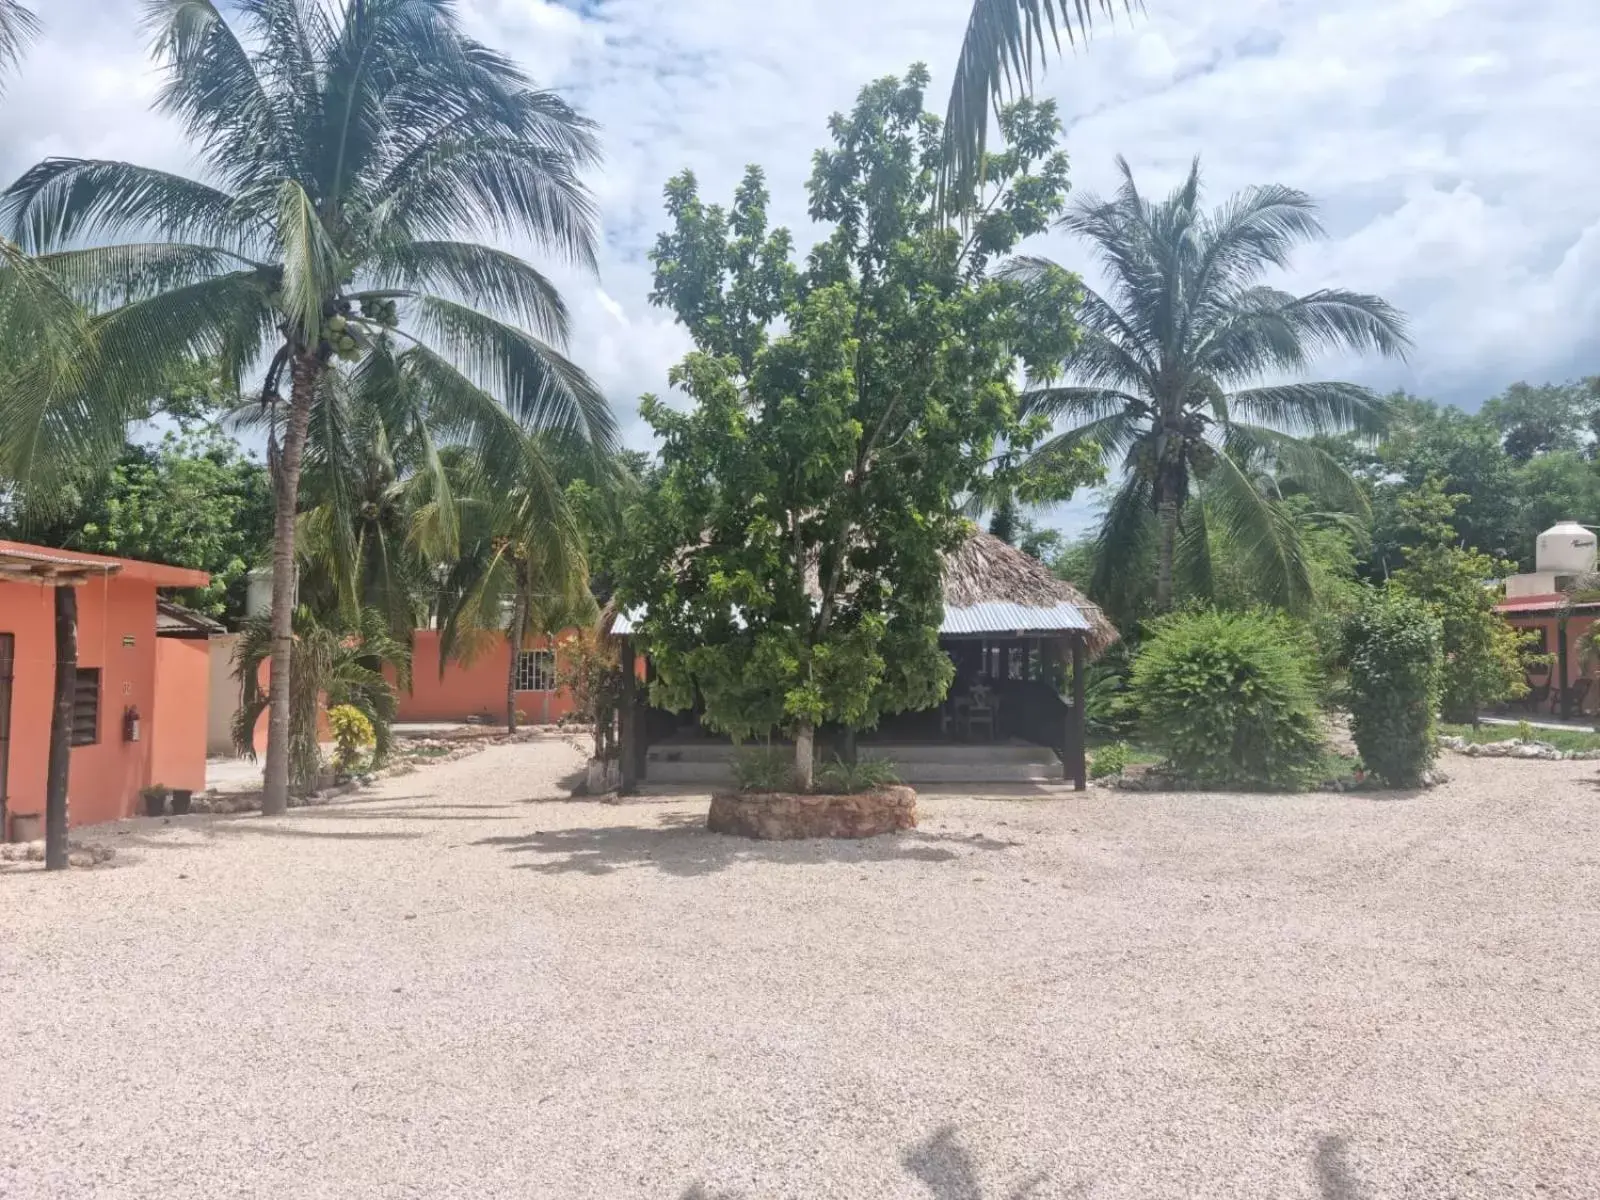 Property Building in Bacalar Sunshine